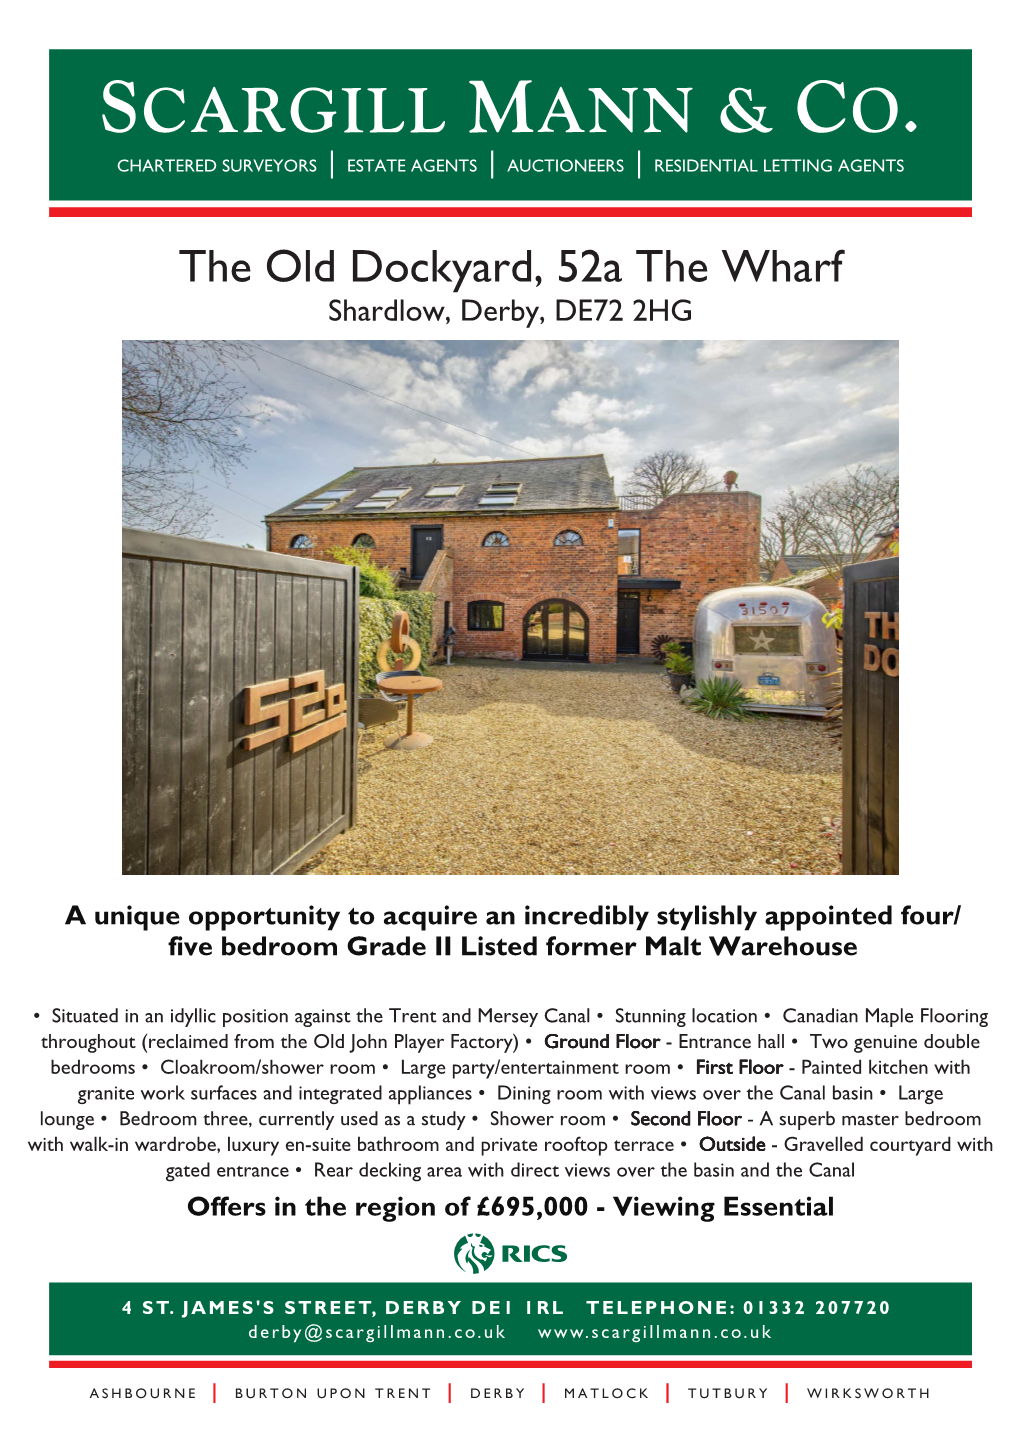 The Old Dockyard, 52A the Wharf Shardlow, Derby, DE72 2HG